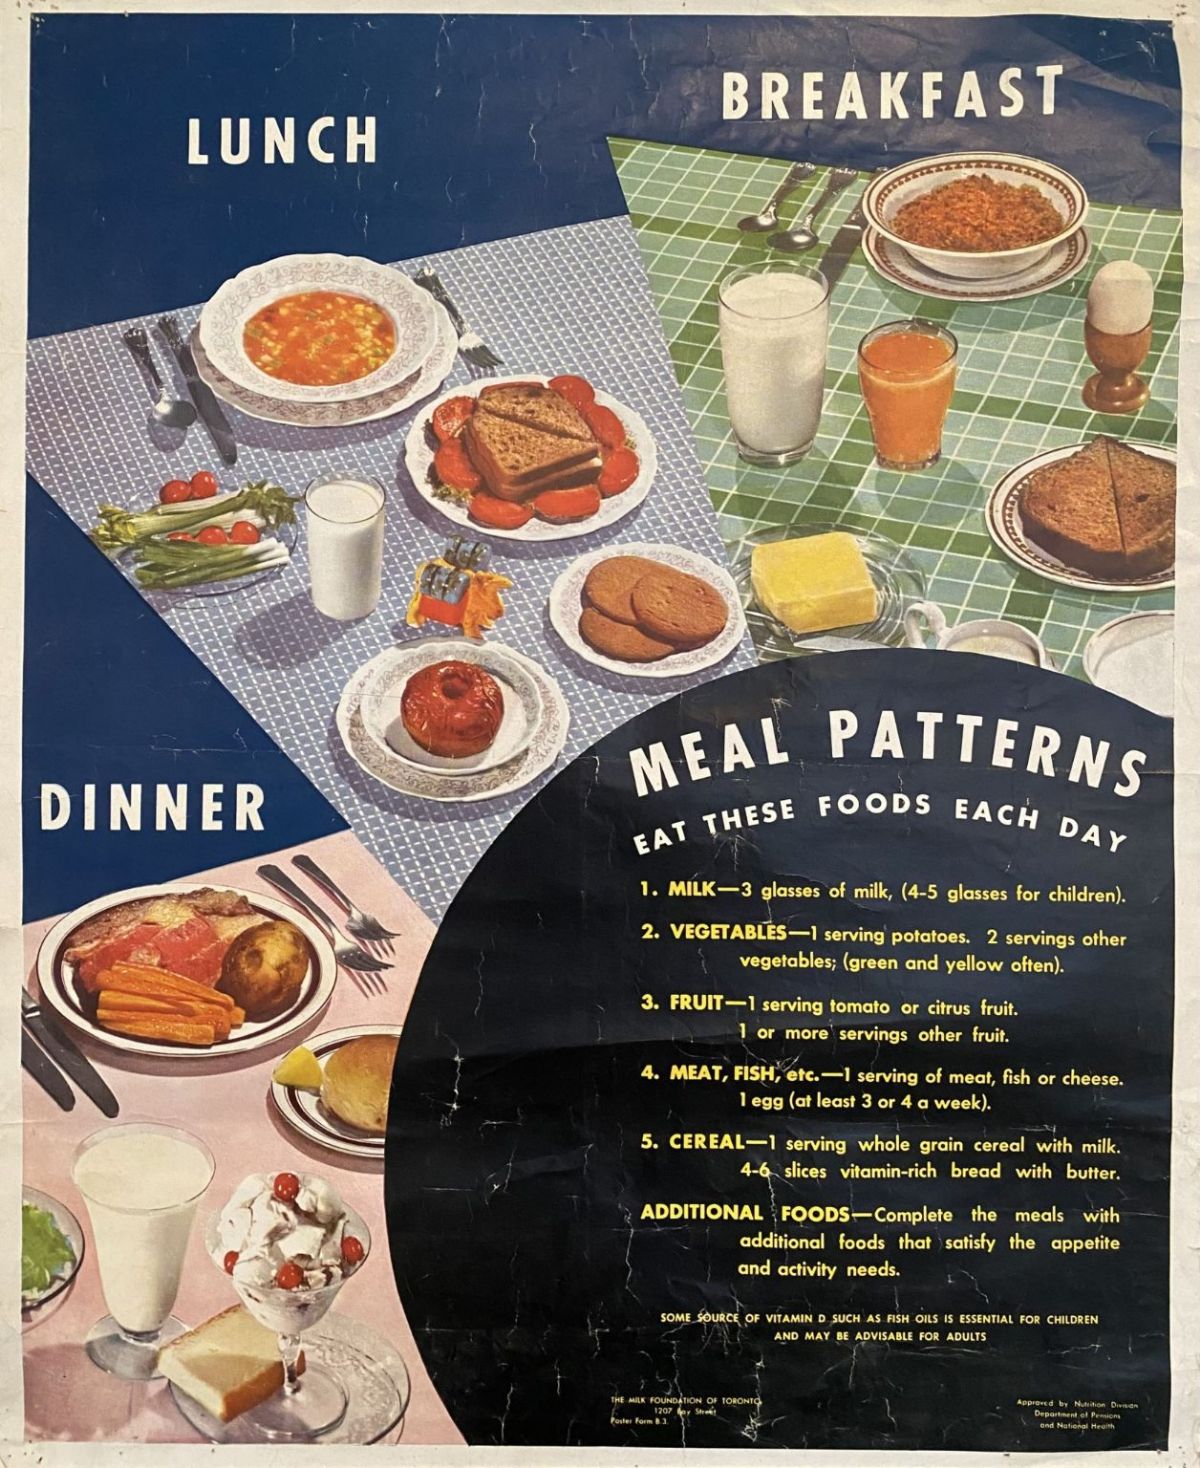 VINTAGE POSTER: Meal Patterns - Eat These Foods Each Day